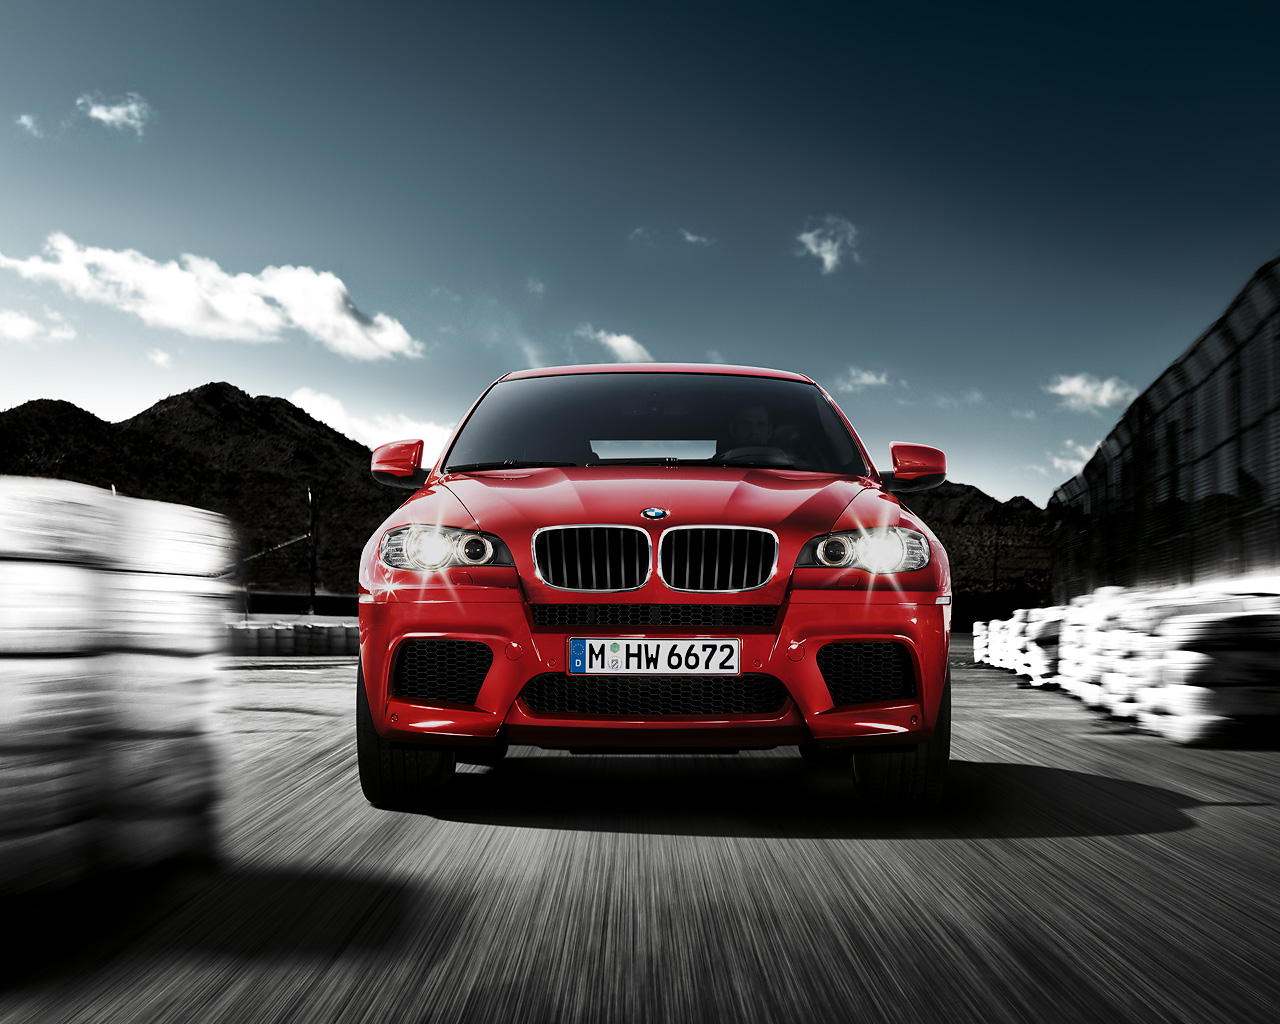 carmodel2012: Cool Bmw cars wallpapers